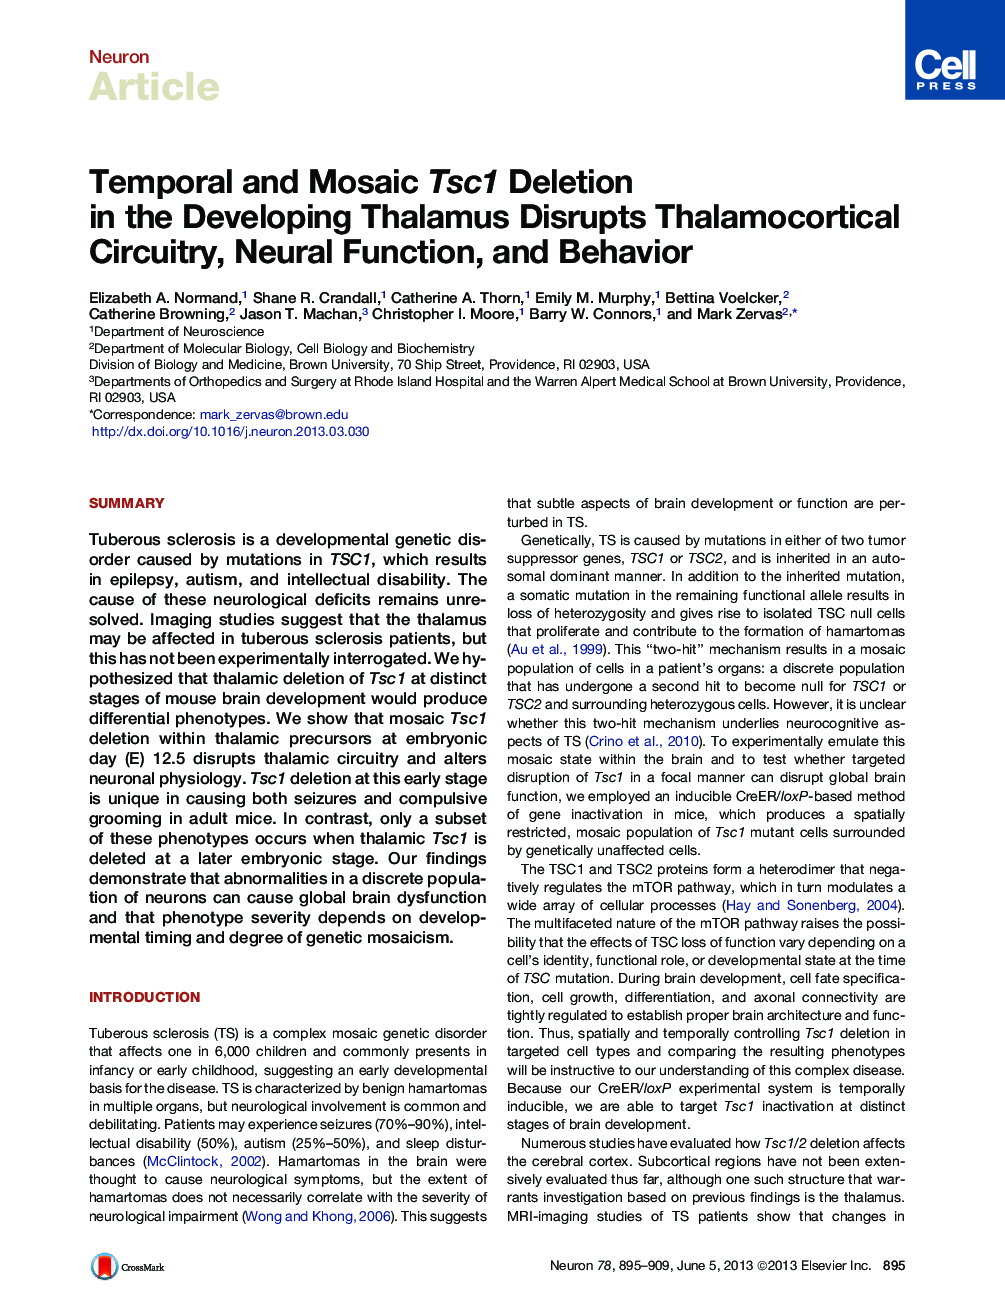 Temporal and Mosaic Tsc1 Deletion in the Developing Thalamus Disrupts Thalamocortical Circuitry, Neural Function, and Behavior